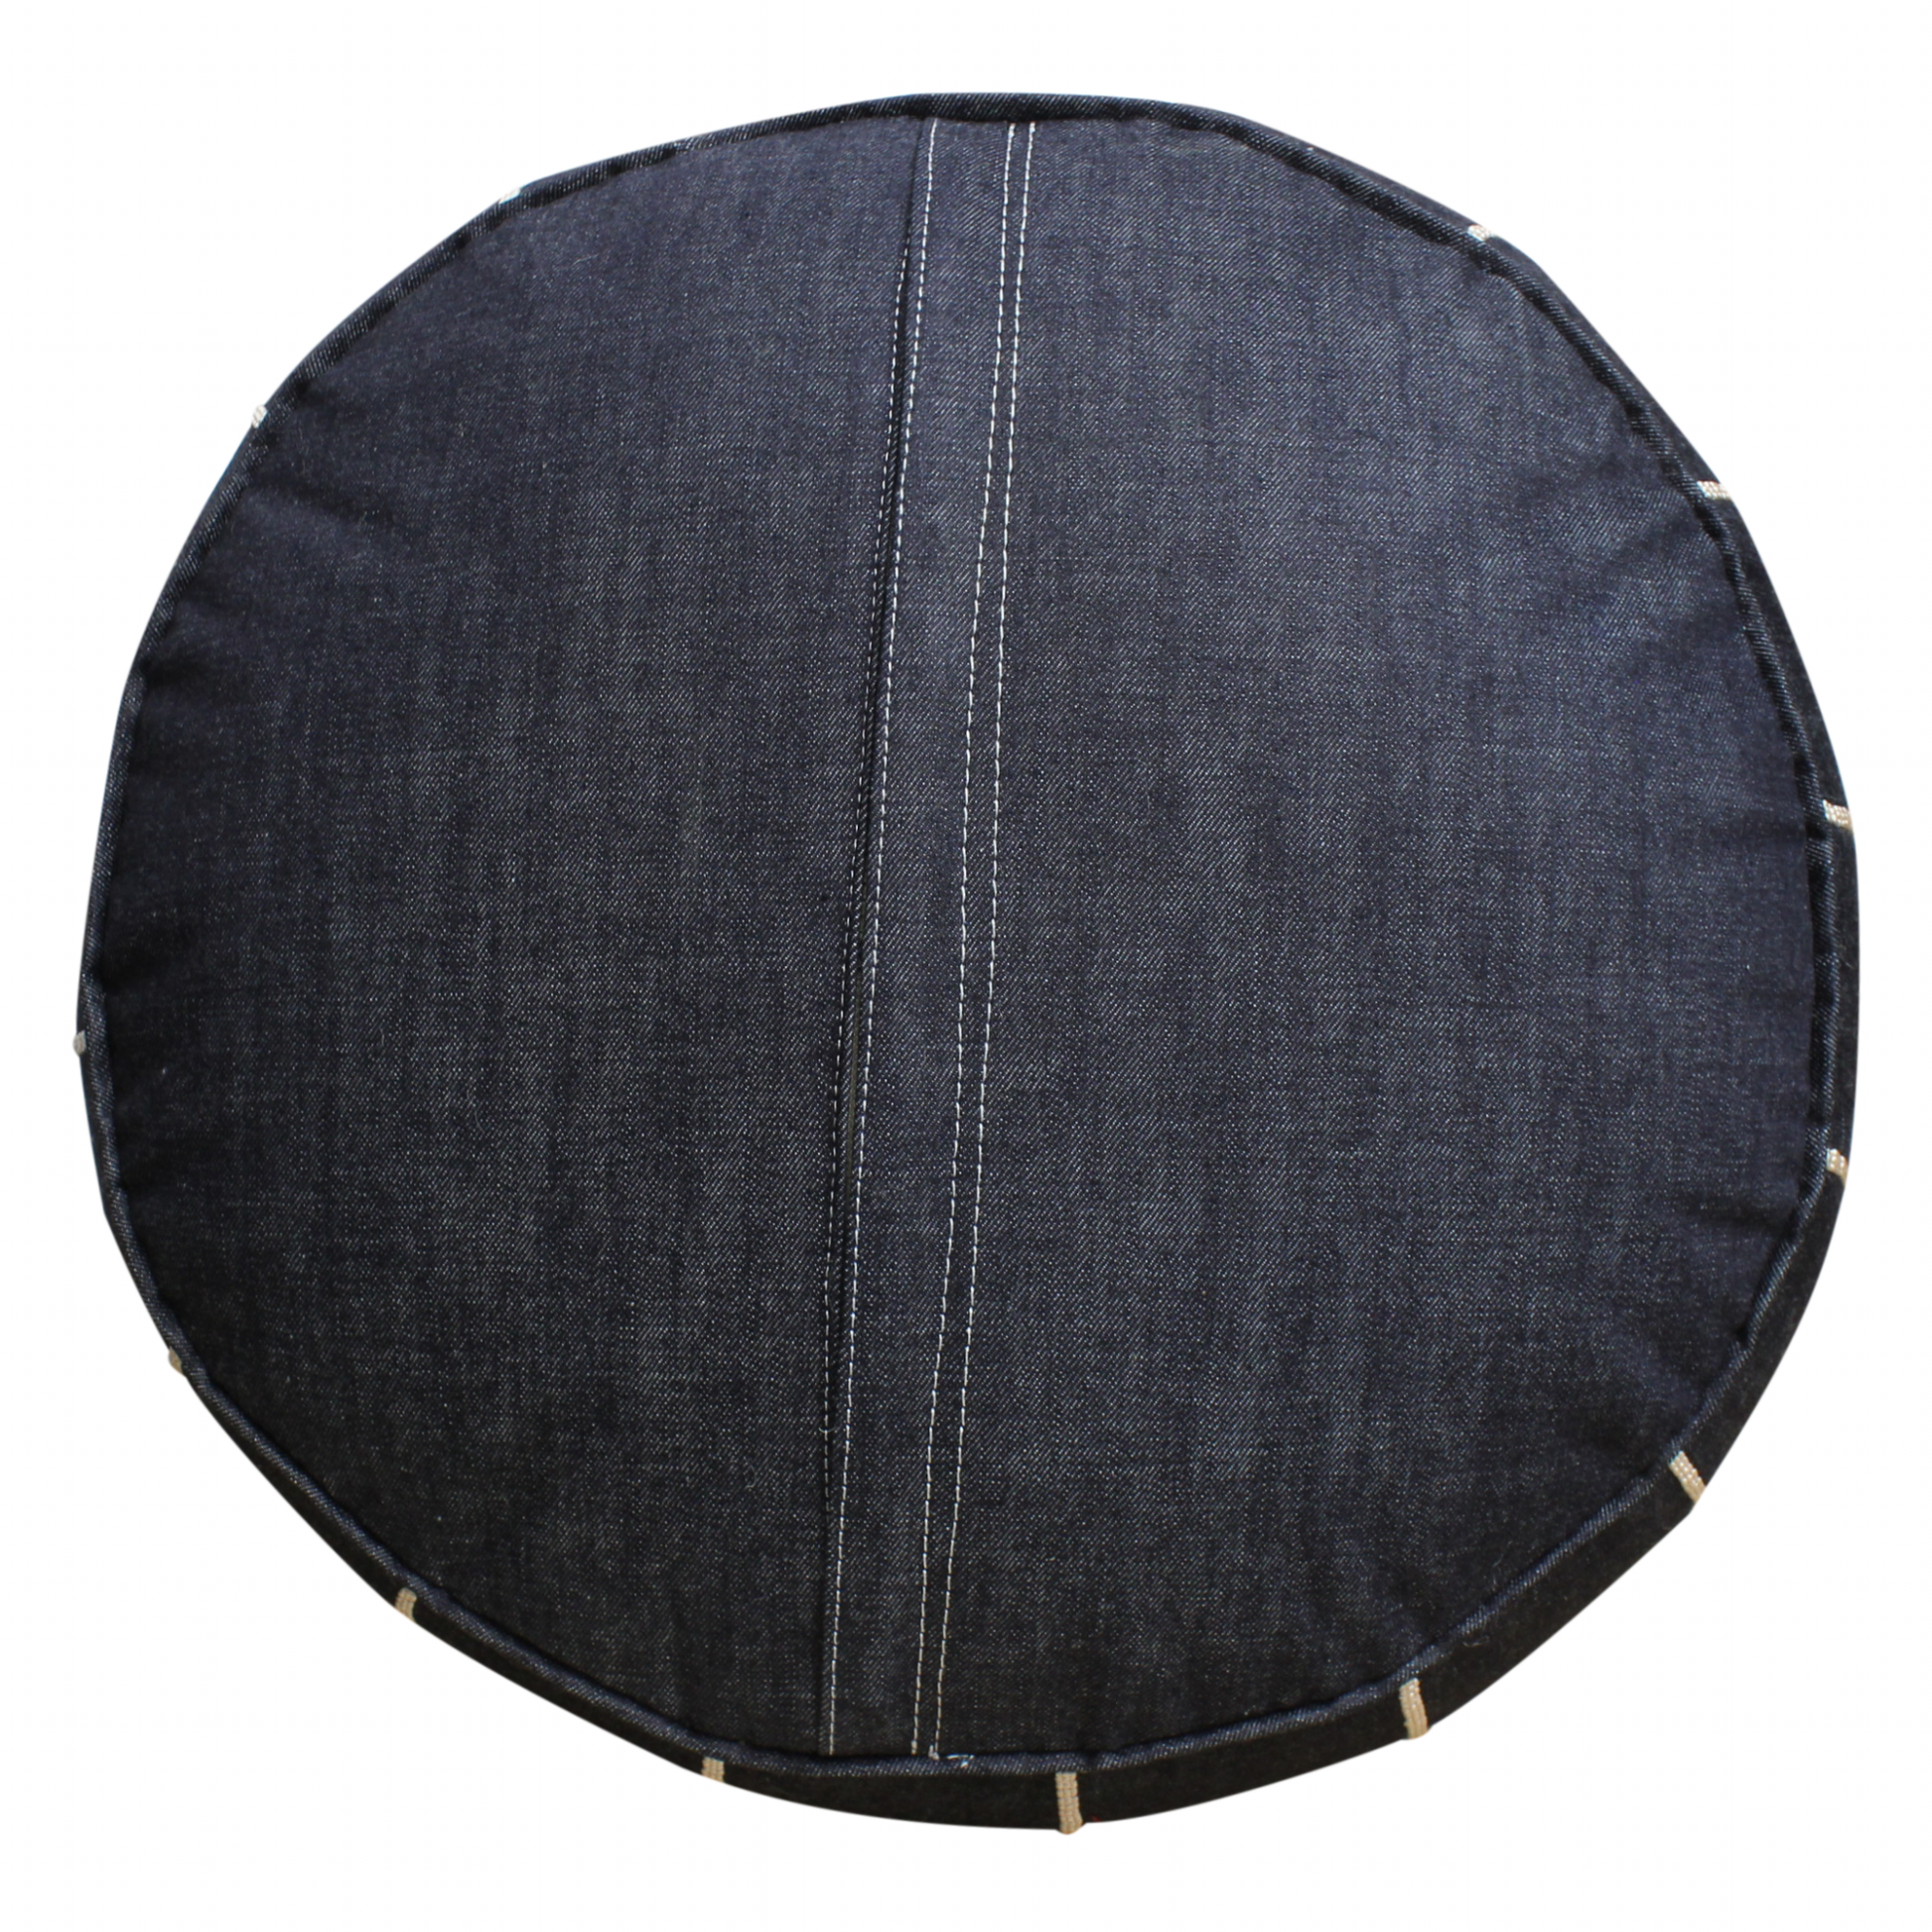 moroccan-denim-pouffe-pouf-footstool-blue-jean-cover-only-or-stuffed